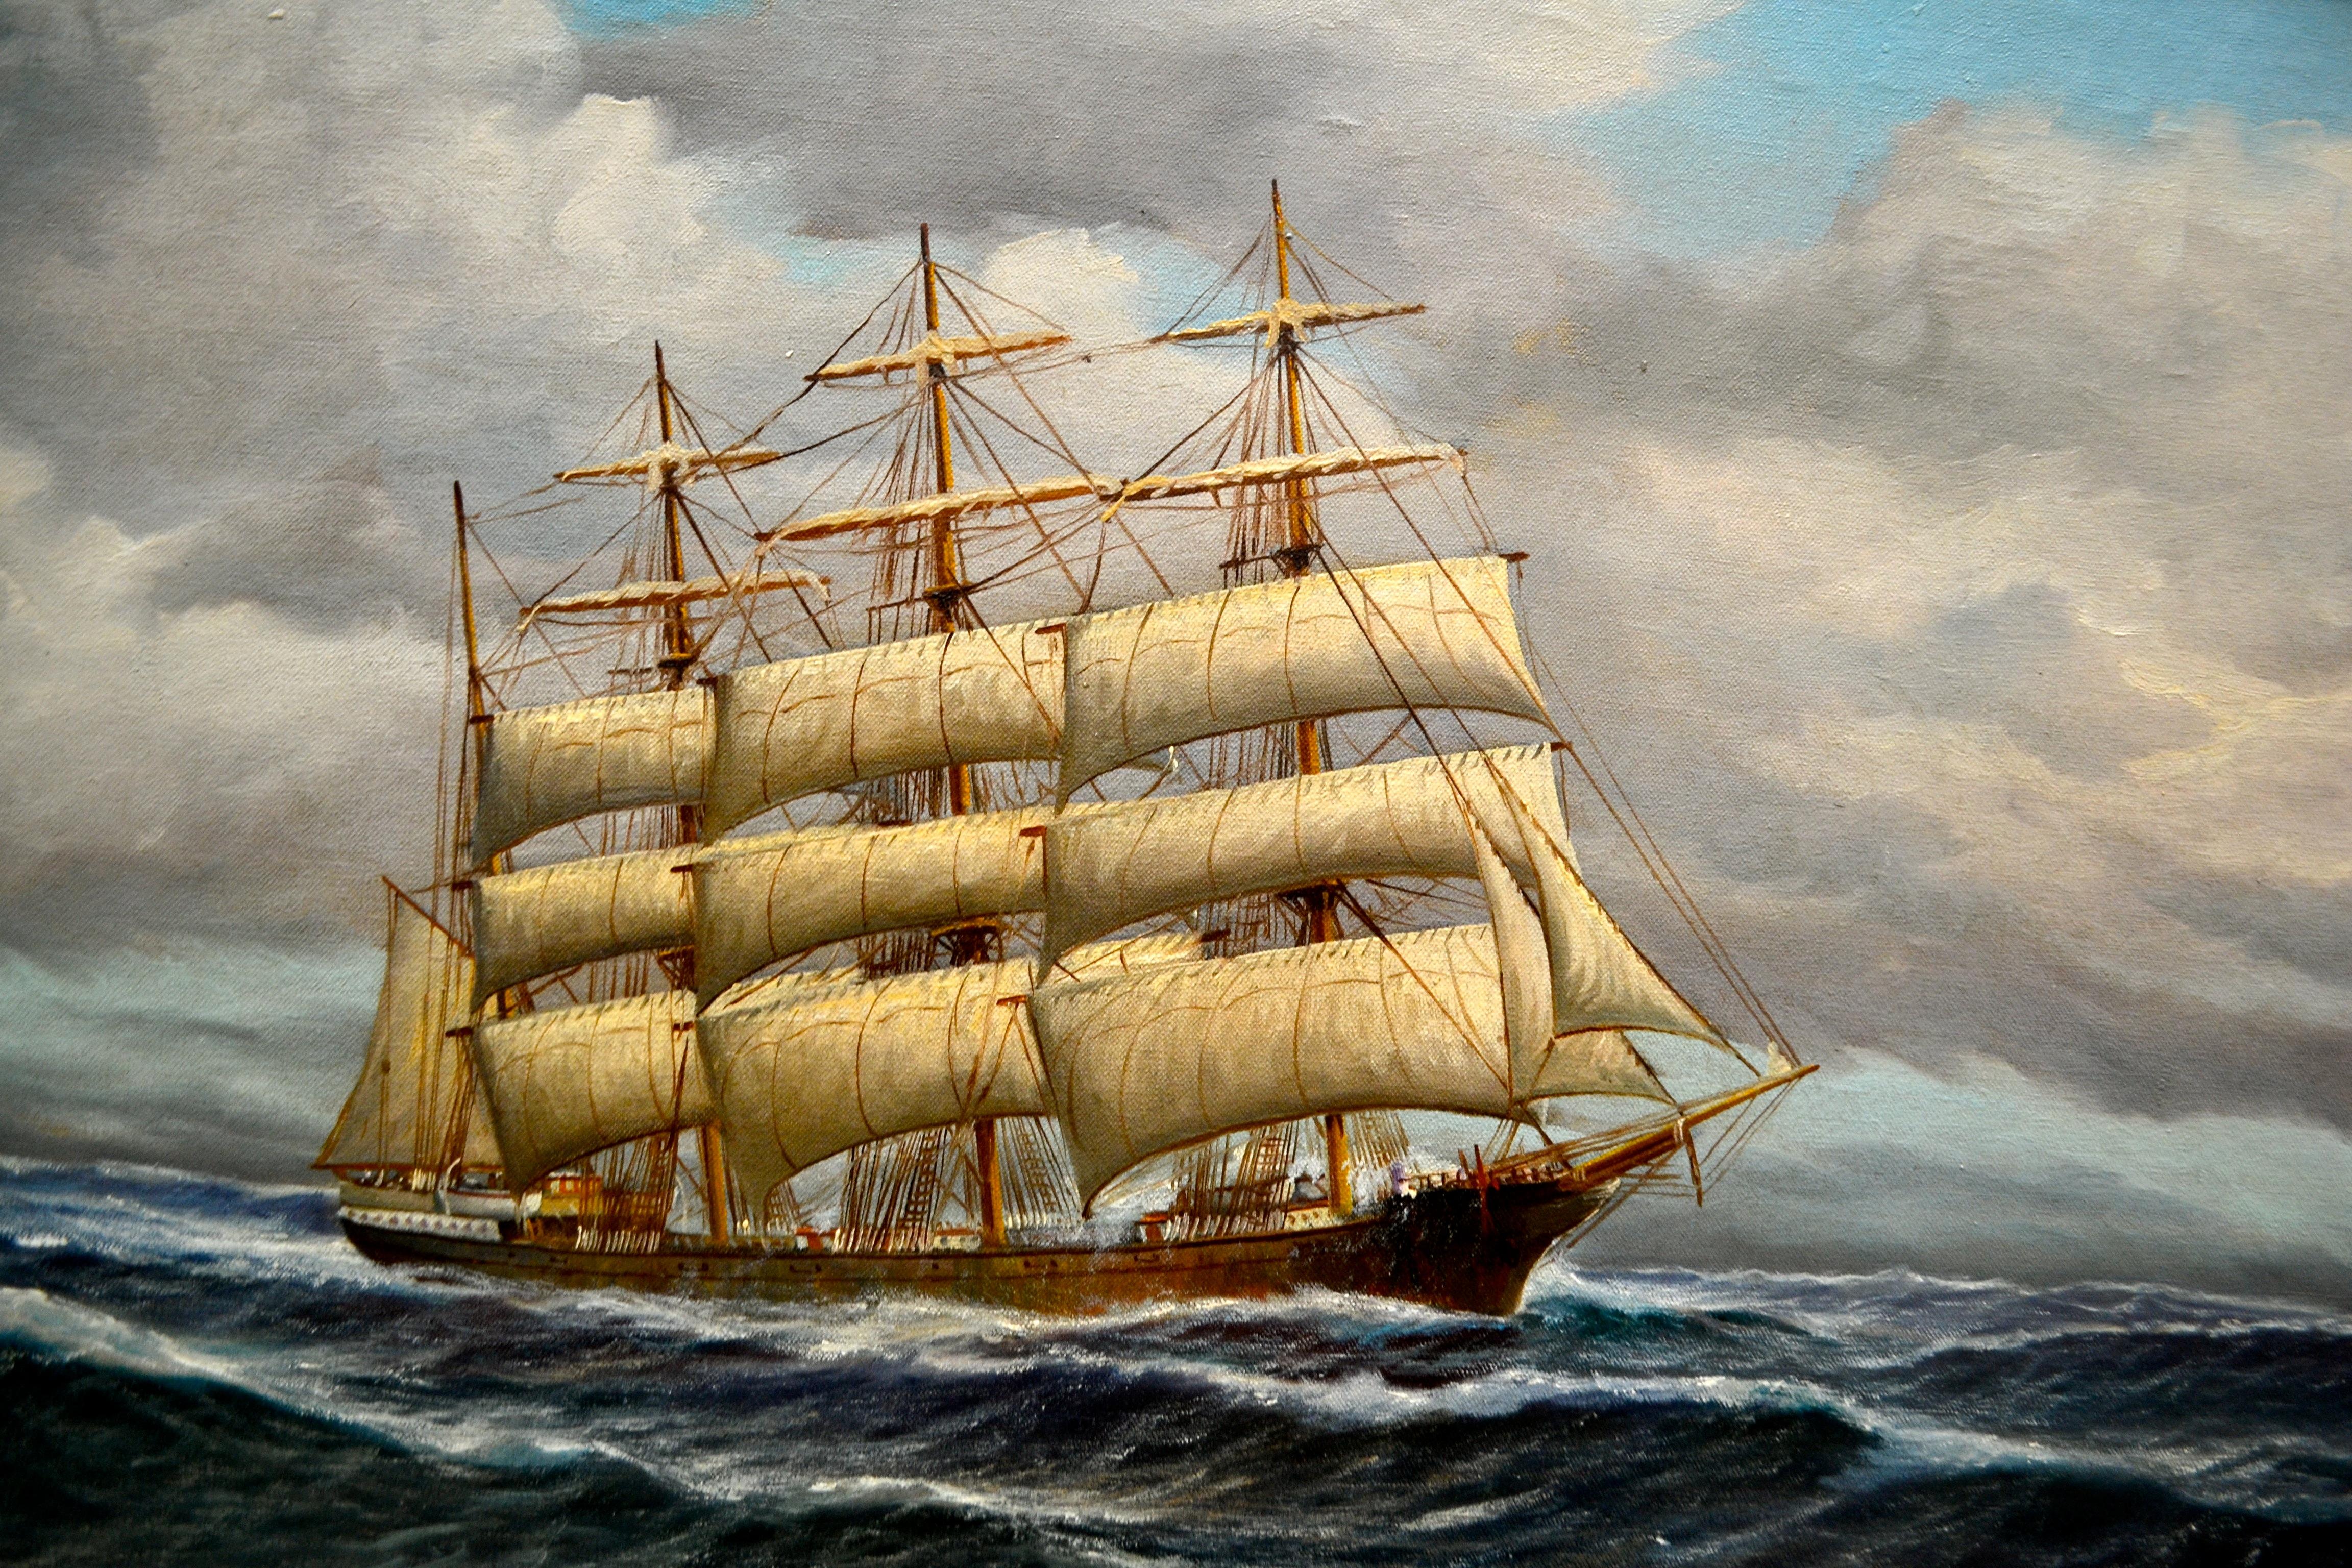 A Classic marine painting (oil on canvas) of a three masted schooner under full sail in choppy seas and a blue and cumulus cloud filled sky. Signed A.Gabali at the lower right hand corner of the canvas. The painting is set in a fully restored period